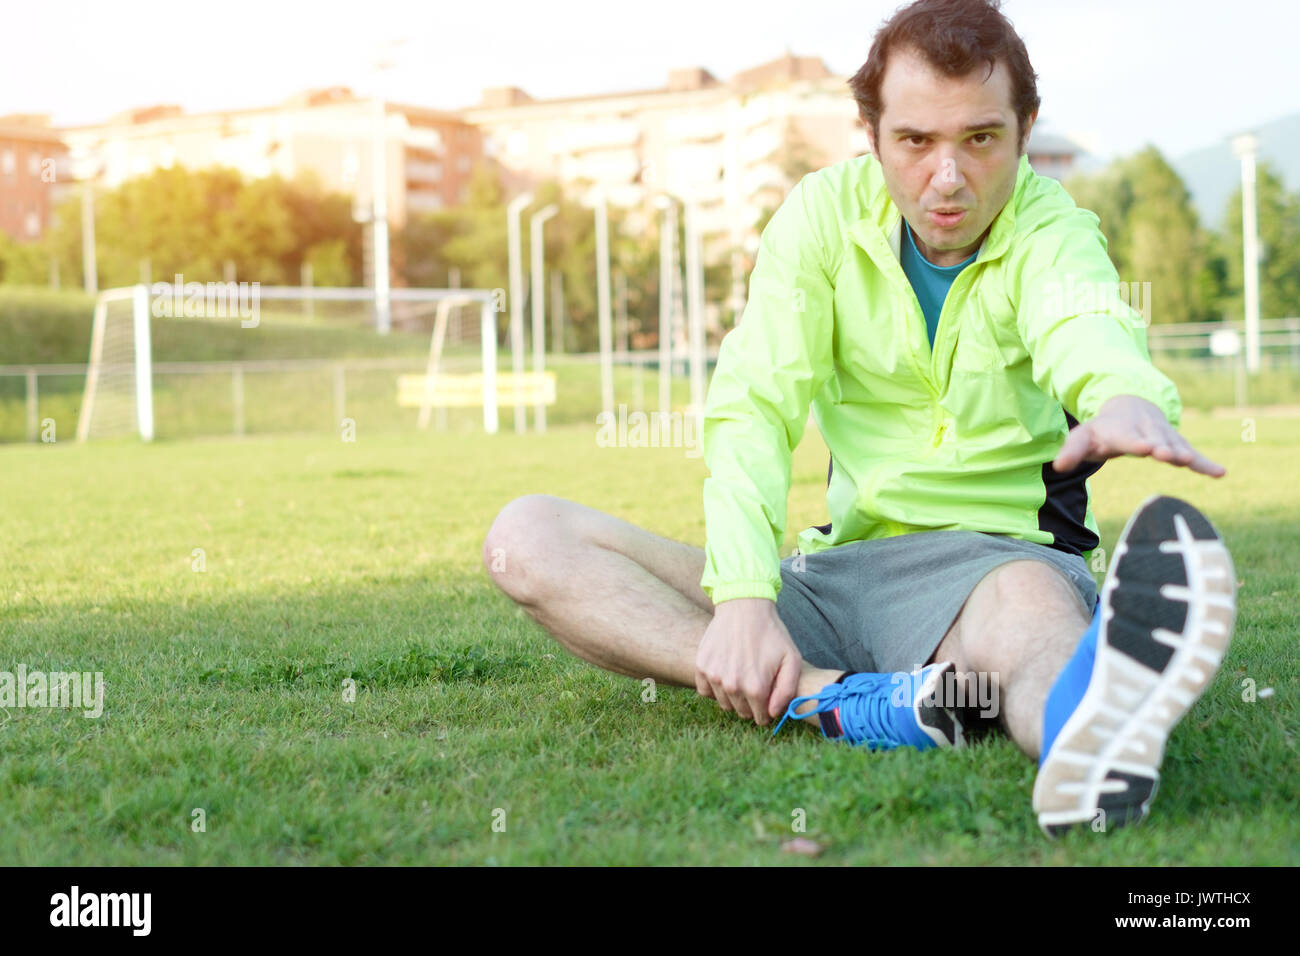 Sportsman exercising in a soccer field and preparing for the match Stock Photo